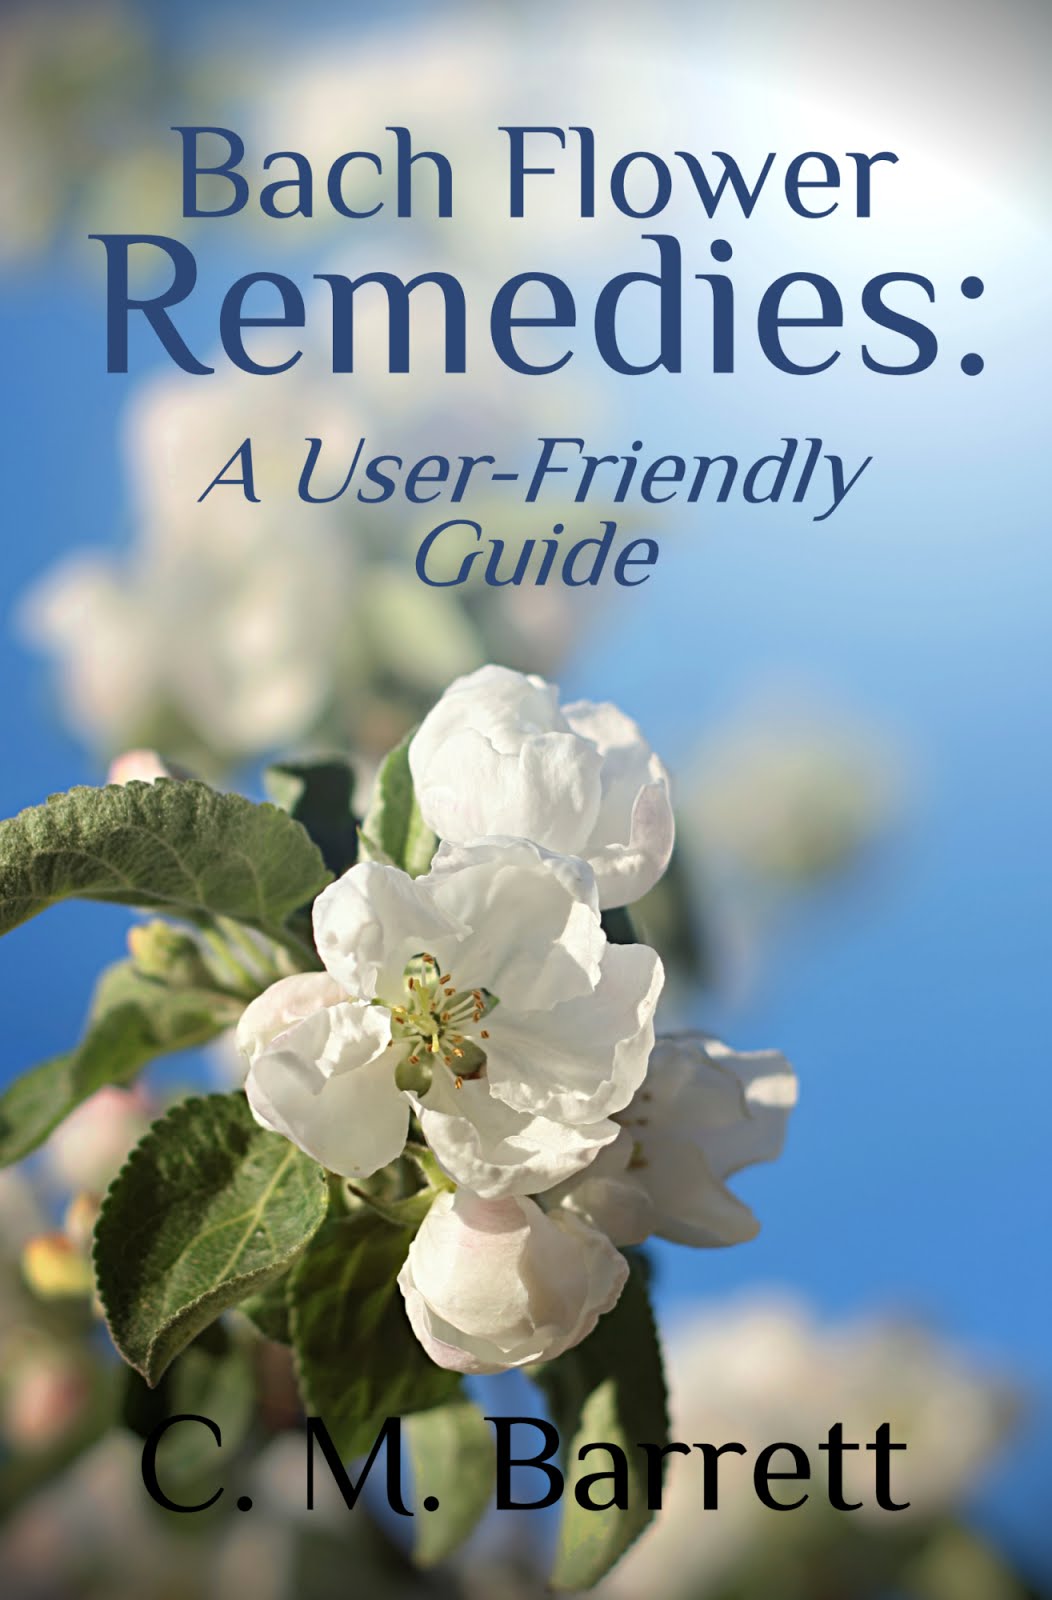 Bach Flower Remedies: A User-friendly Guide